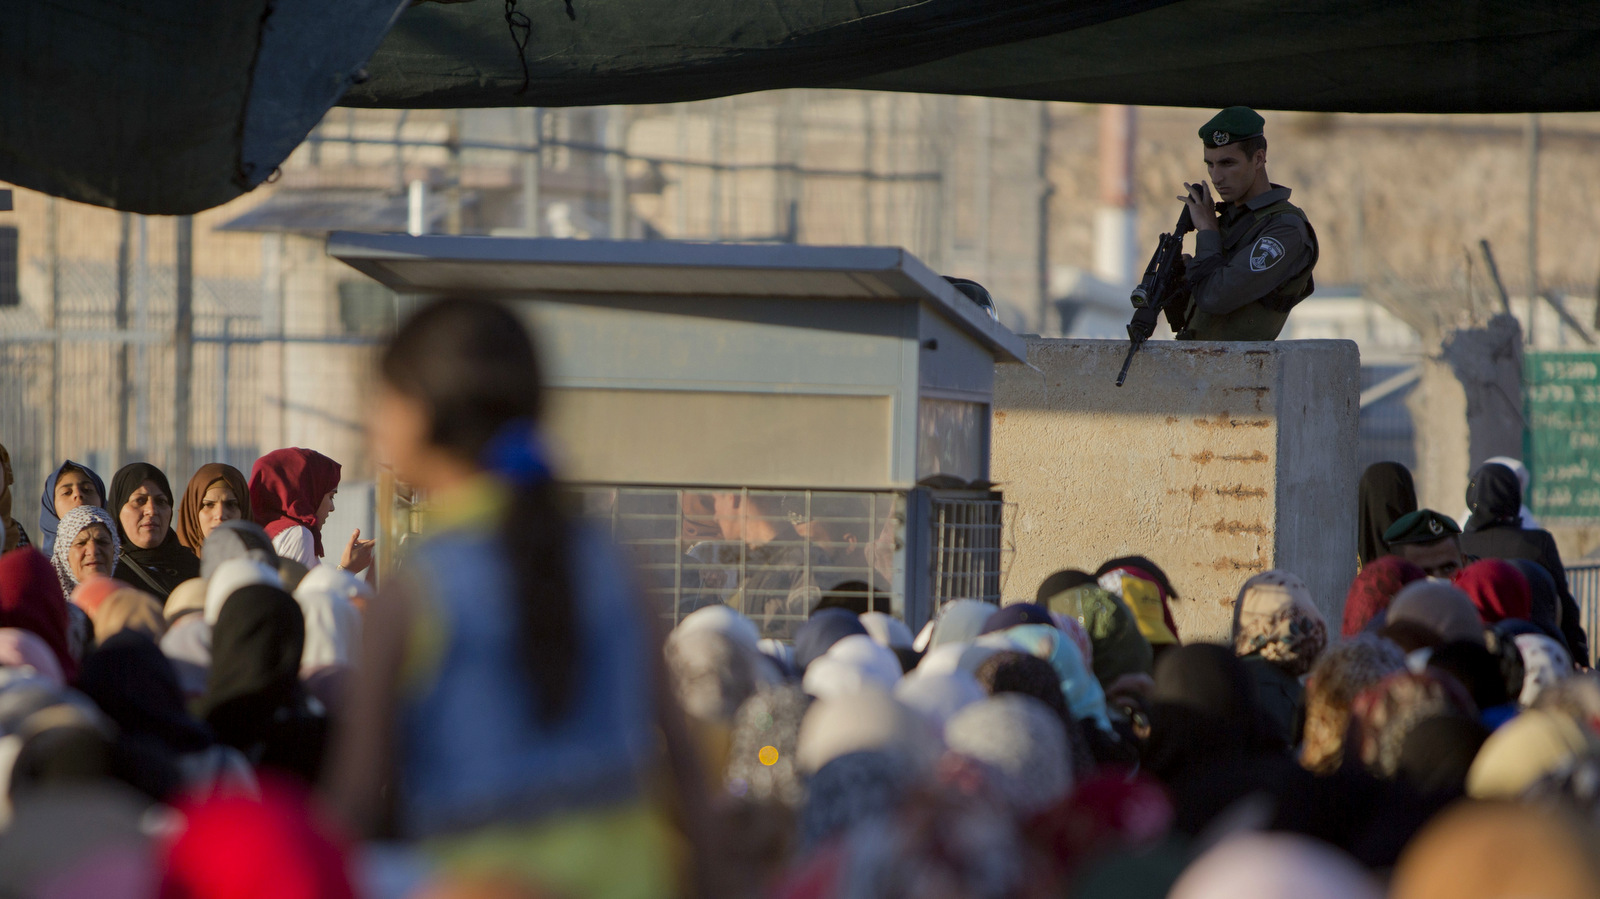 An Israeli border police officer stands as Palestinian women wait to cross the Qalandia checkpoint between the West Bank city of Ramallah and Jerusalem, June 17, 2015. (AP Photo/Majdi Mohammed)